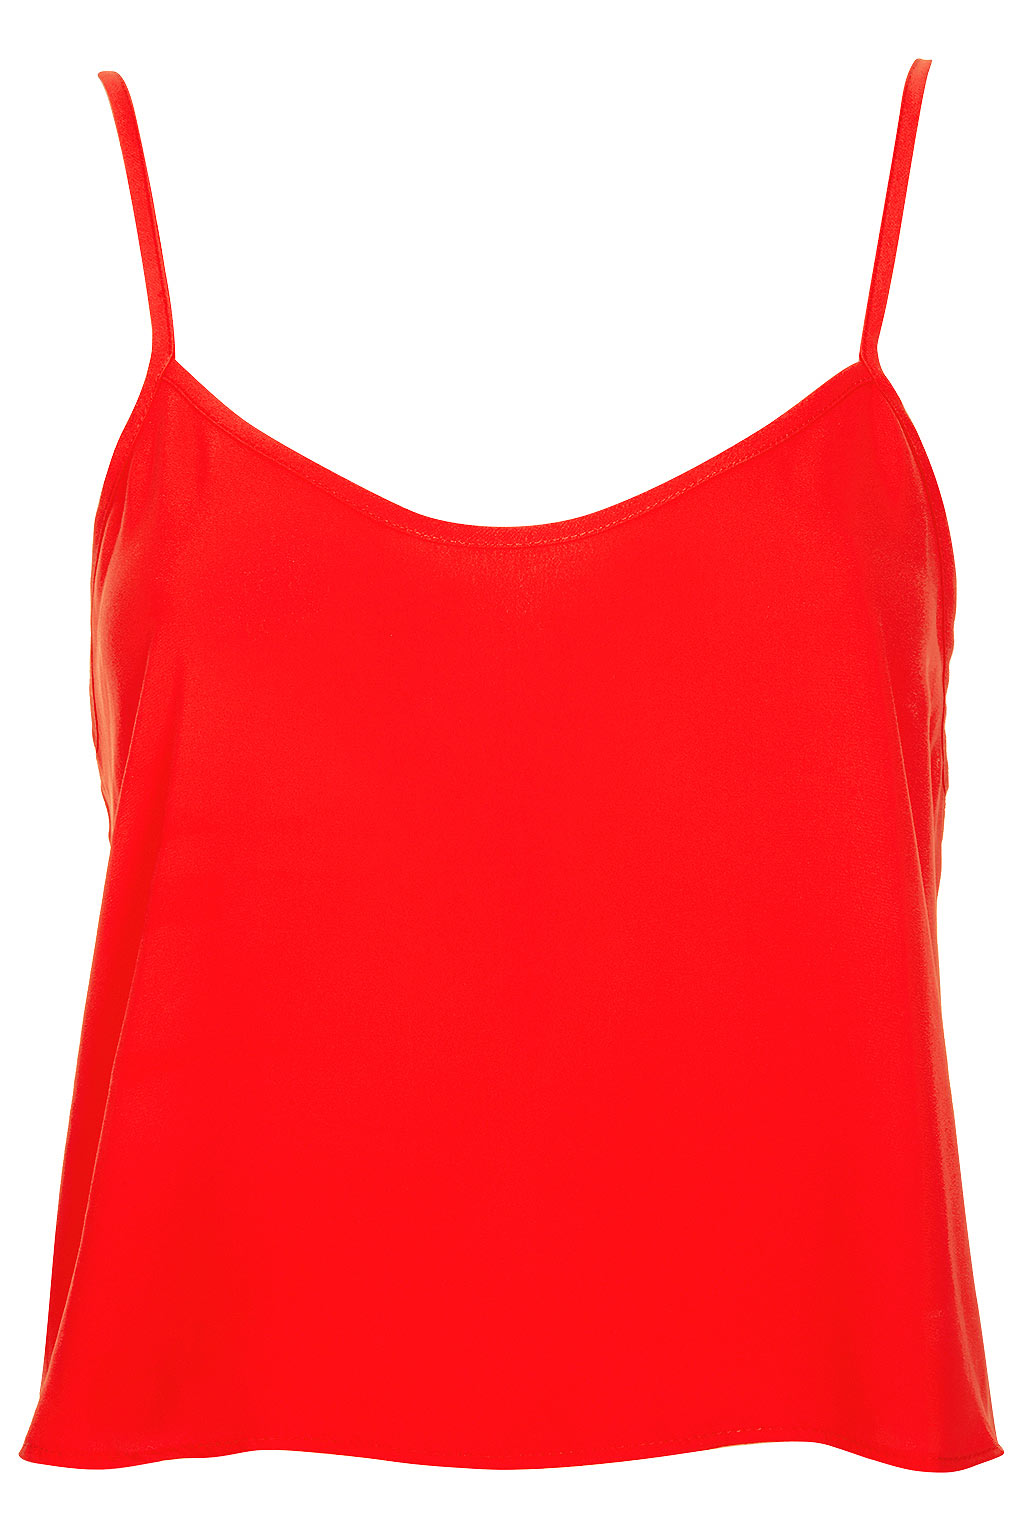 Lyst - Topshop Crop Strappy Cami in Red